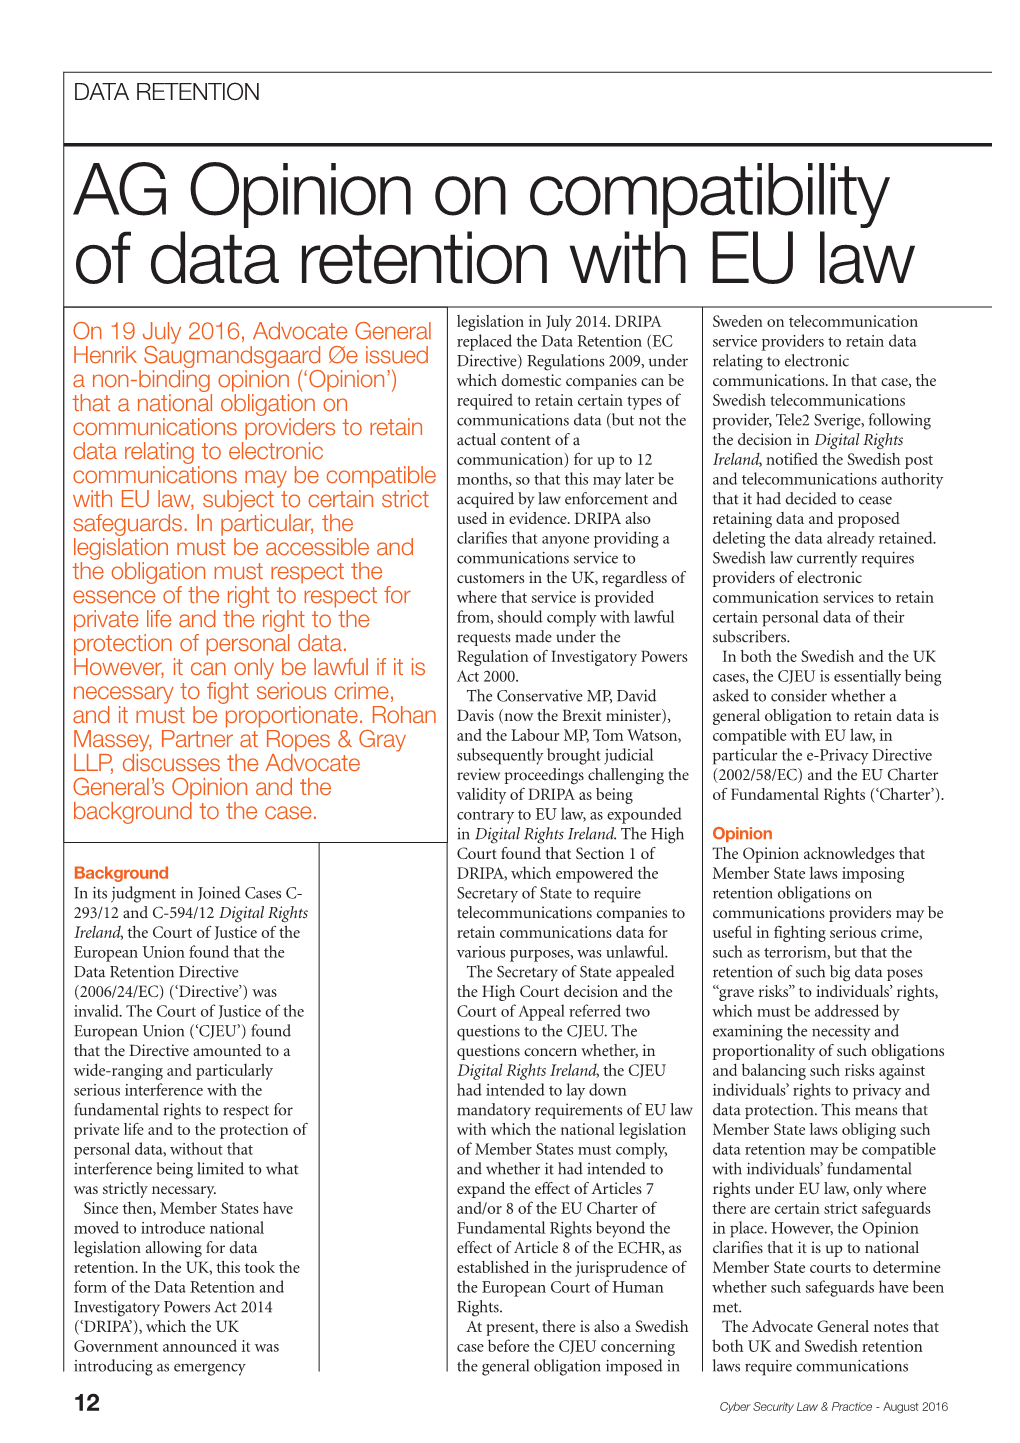 AG Opinion on Compatibility of Data Retention with EU Law Legislation in July 2014